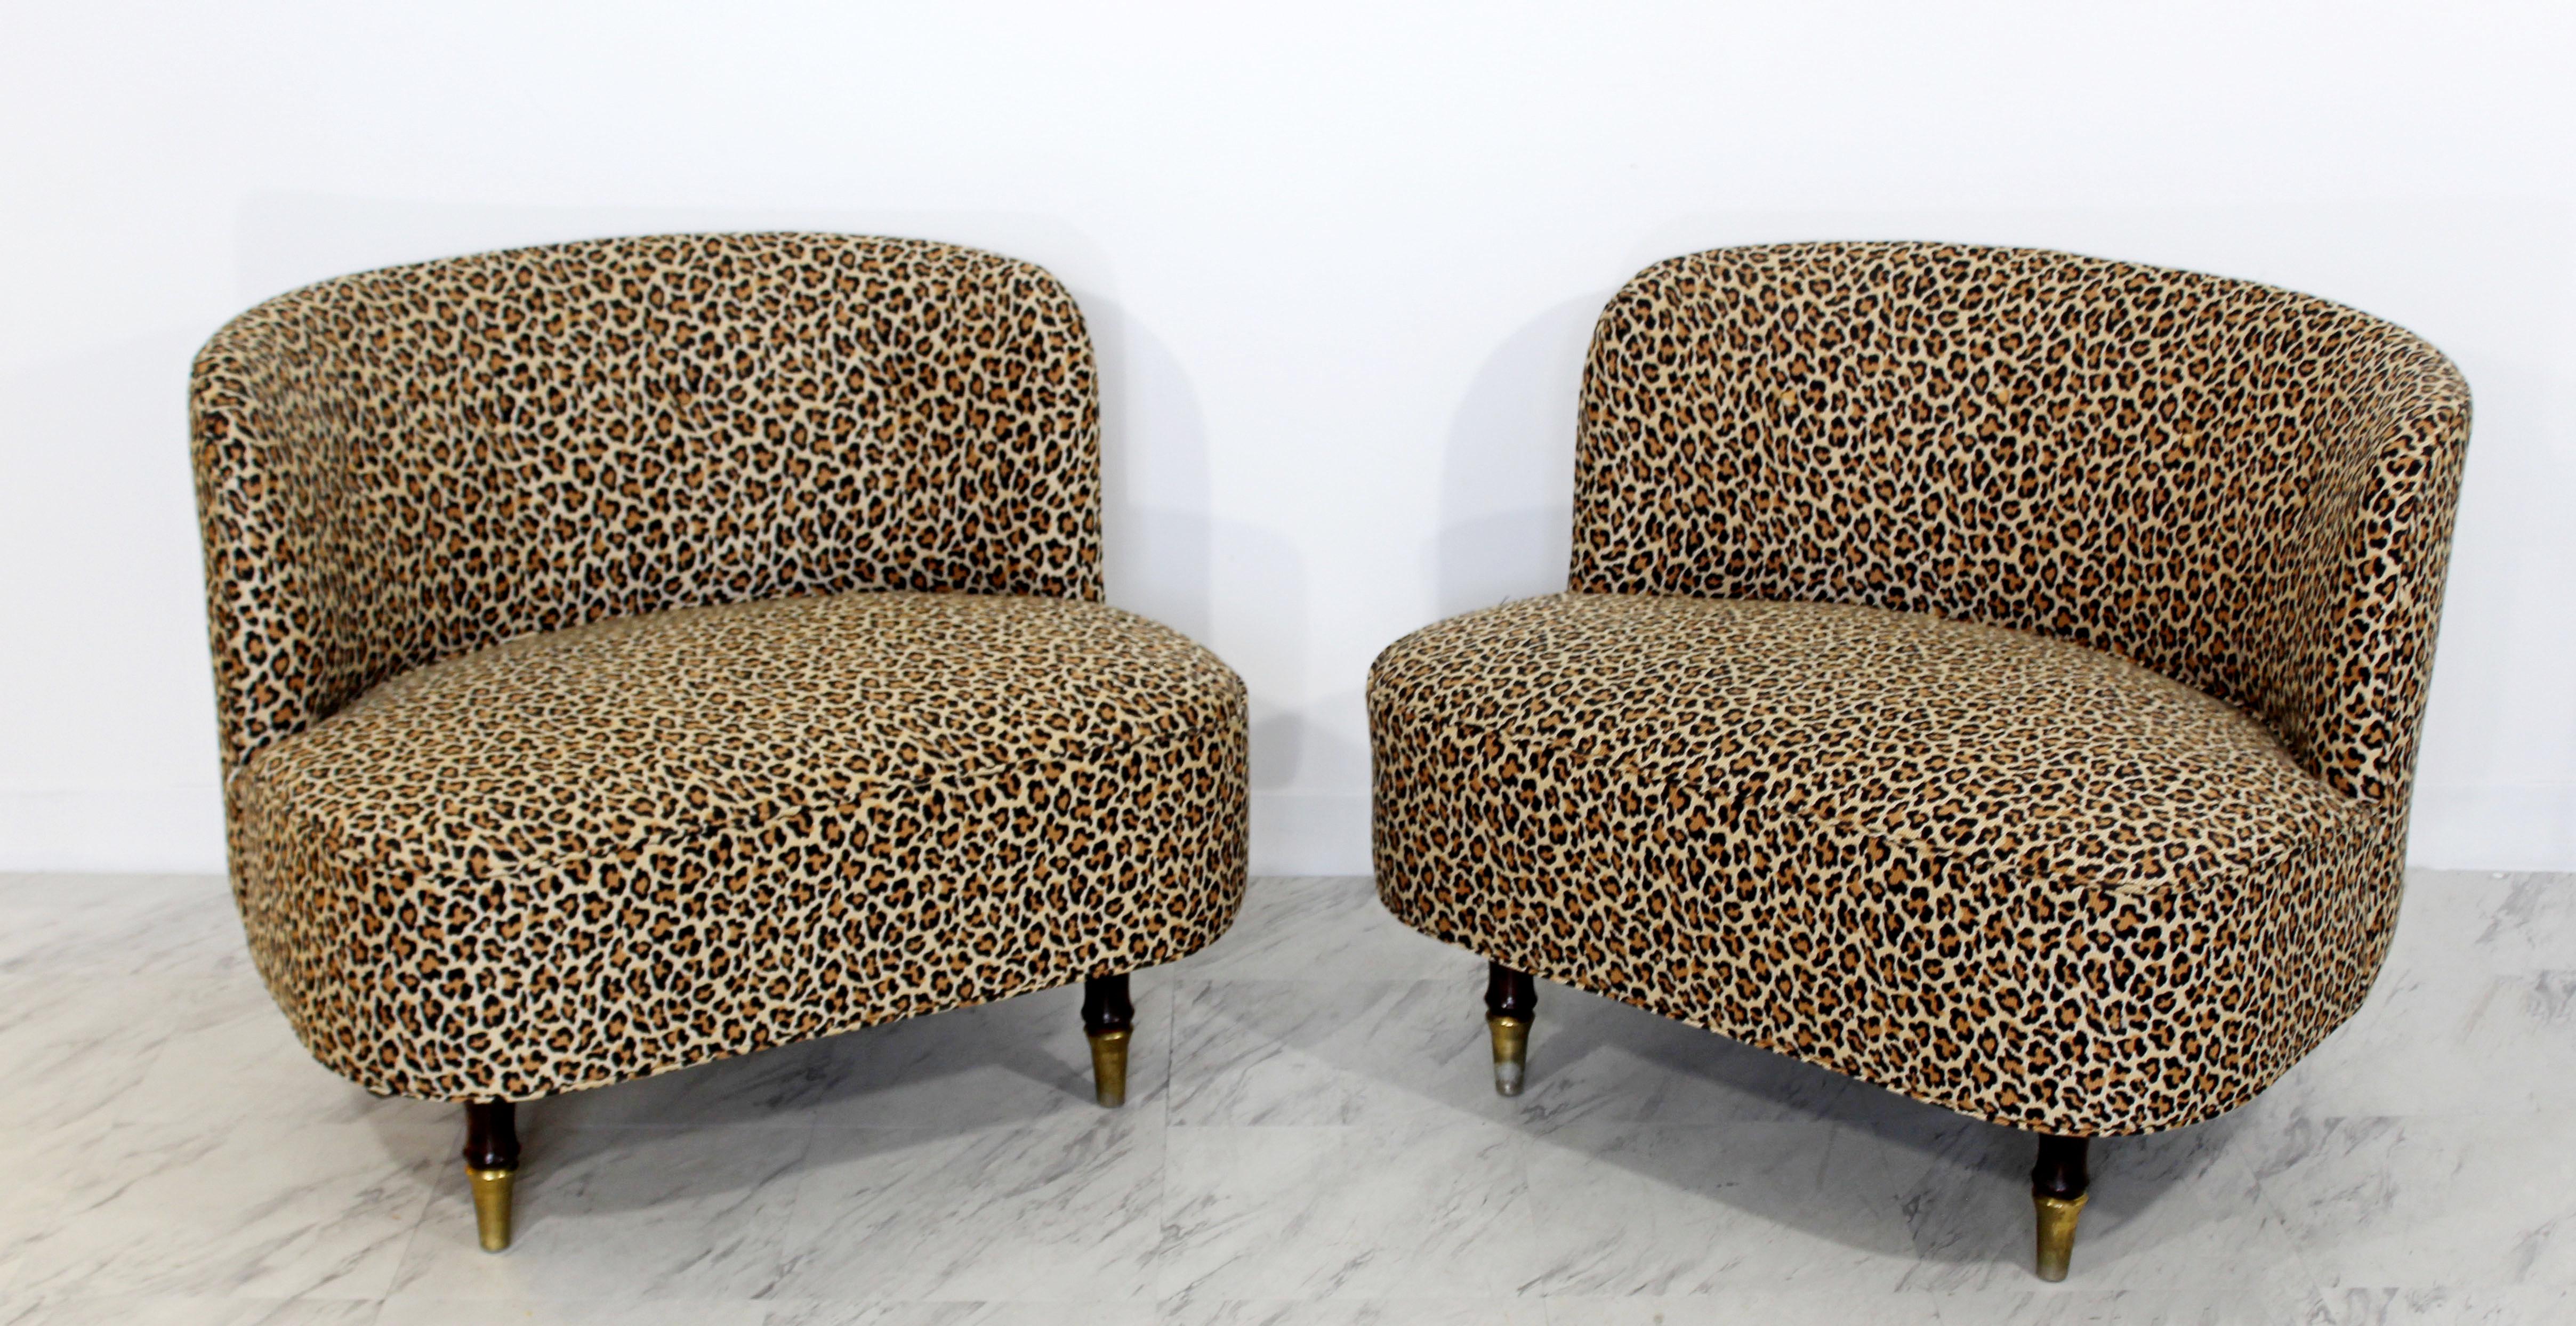 For your consideration is an incredible pair of tufted slipper chairs, with a leopard print upholstery on brass and mahogany legs, in the style of Gilbert Rohde or Billy Haines. In excellent condition. The dimensions are 32